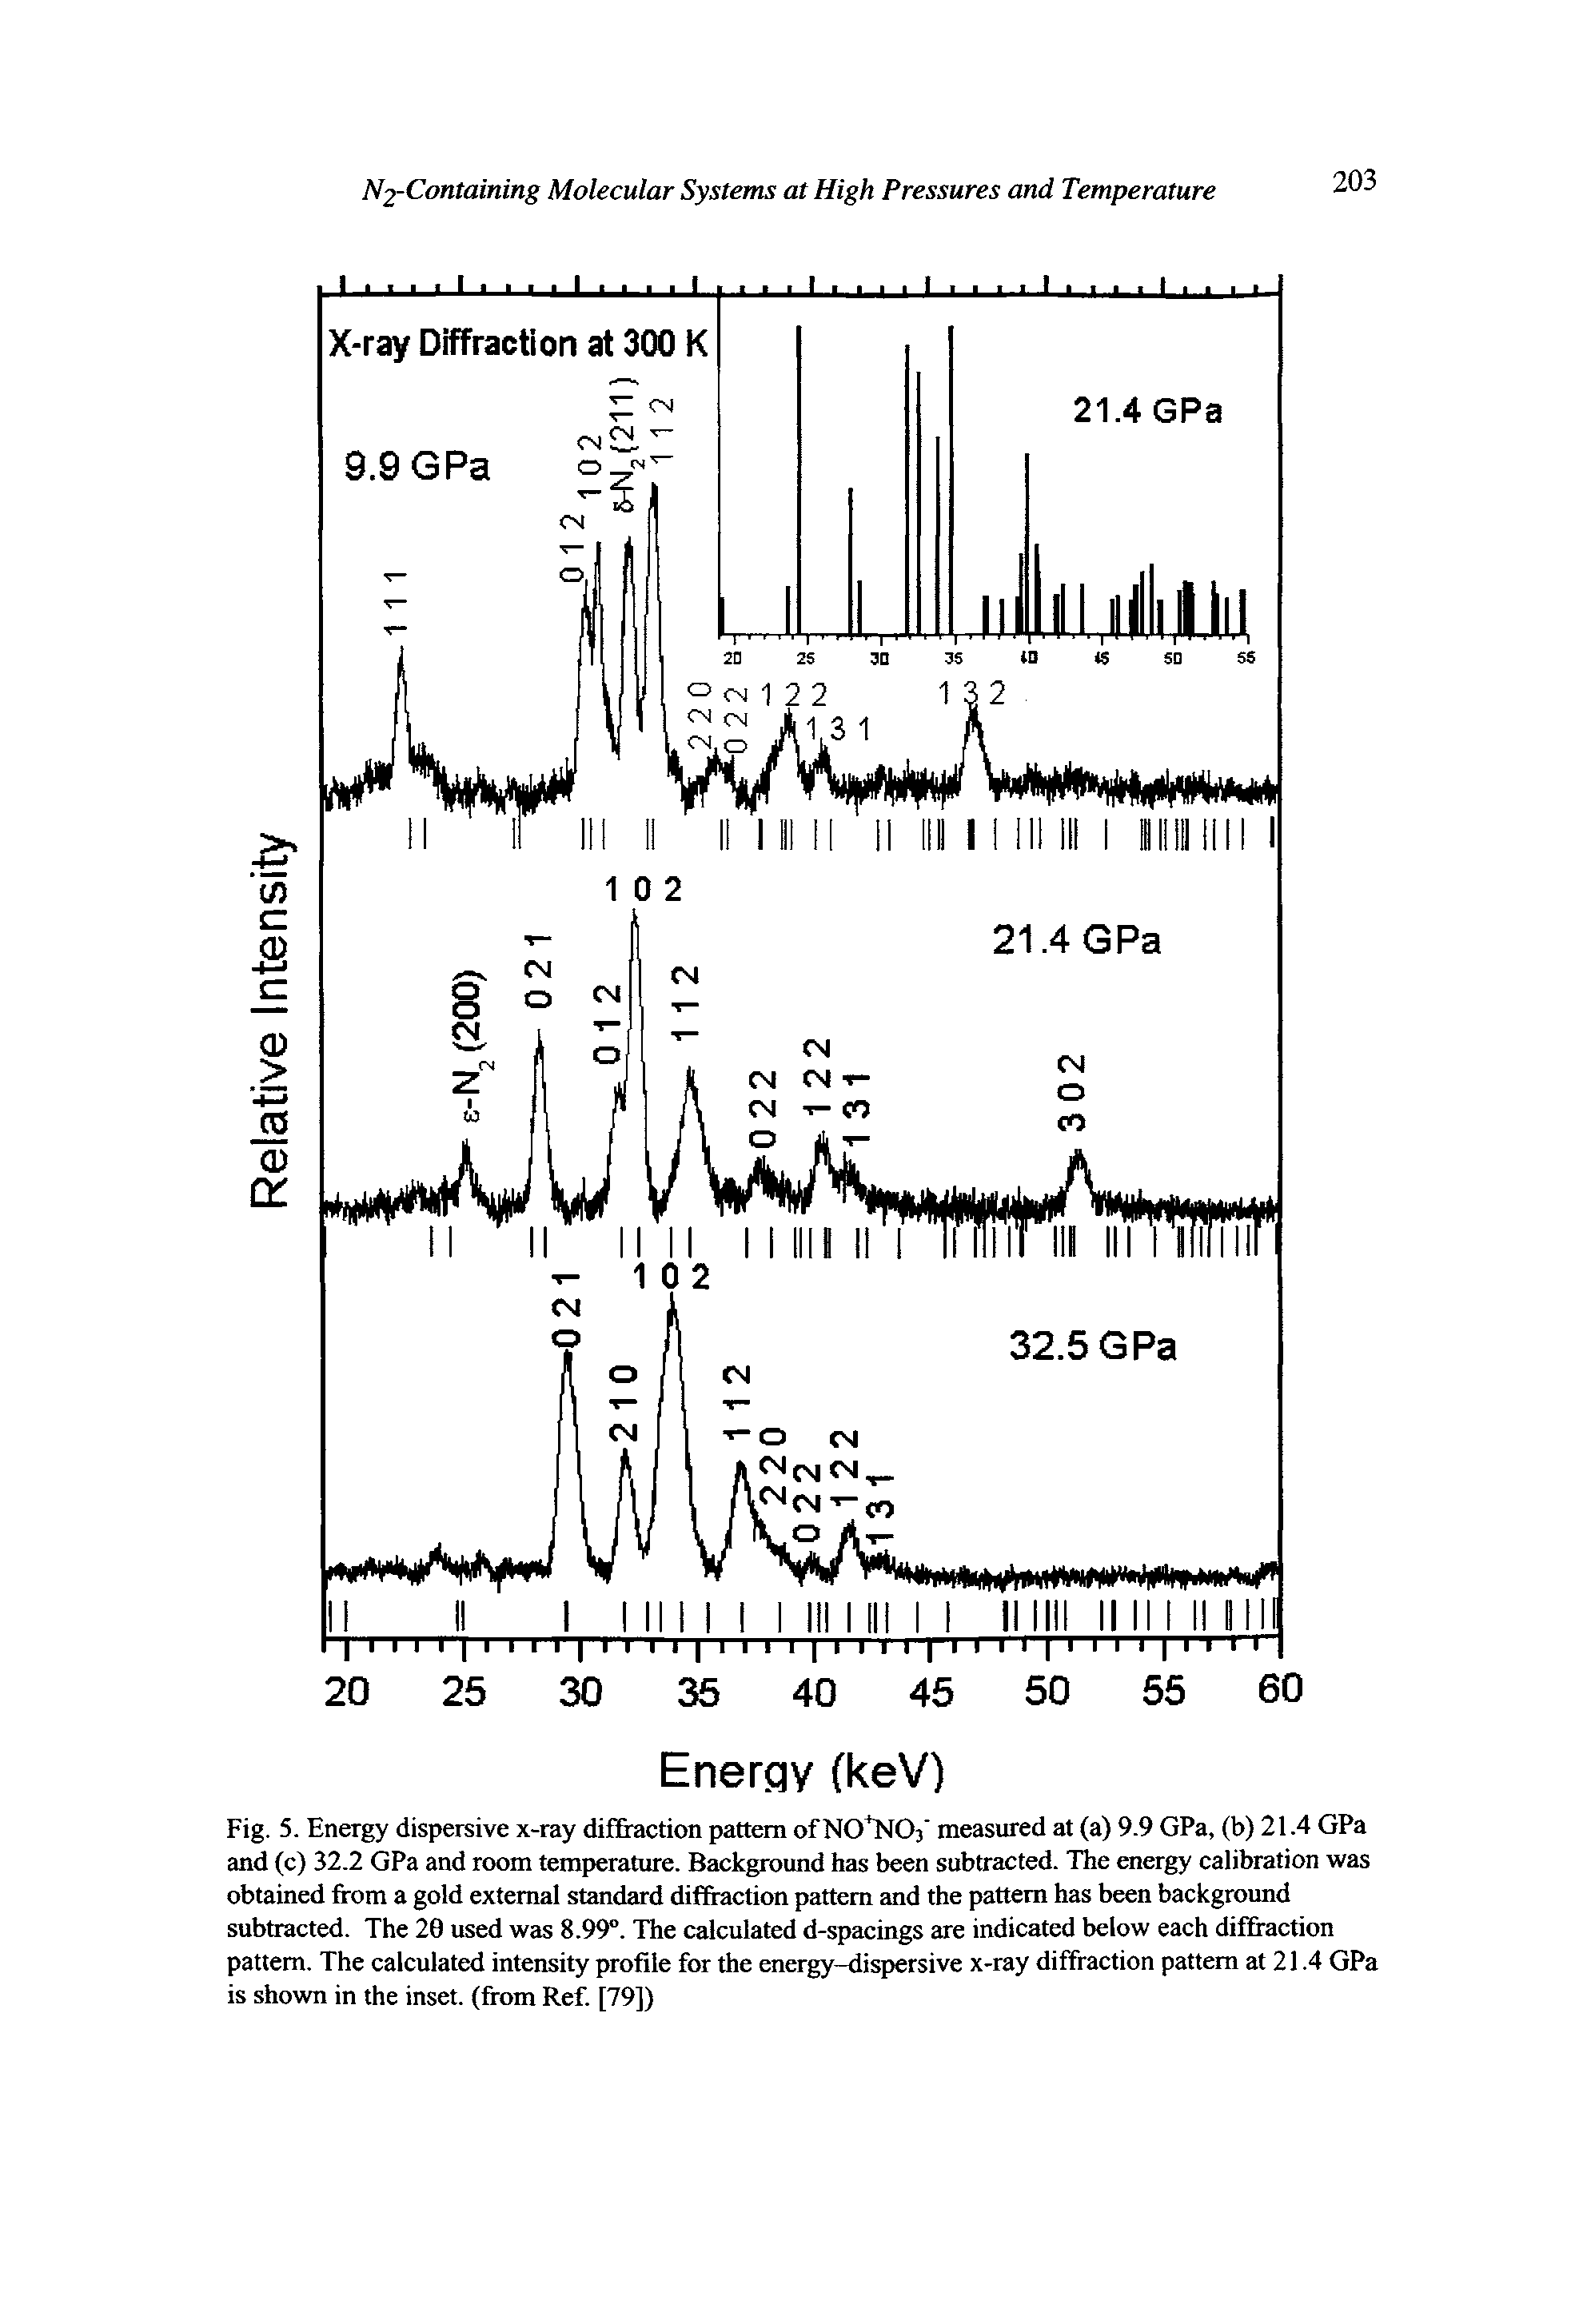 Fig. 5. Energy dispersive x-ray diffraction pattern ofNO NOs measured at (a) 9.9 GPa, (b) 21.4 GPa and (c) 32.2 GPa and room temperature. Background has been subtracted. The energy calibration was obtained from a gold external standard diffraction pattern and the pattern has been background subtracted. The 20 used was 8.99°. The calculated d-spacings are indicated below each diffraction pattern. The calculated intensity profile for the energy-dispersive x-ray diffraction pattern at 21.4 GPa is shown in the inset, (from Ref. [79])...